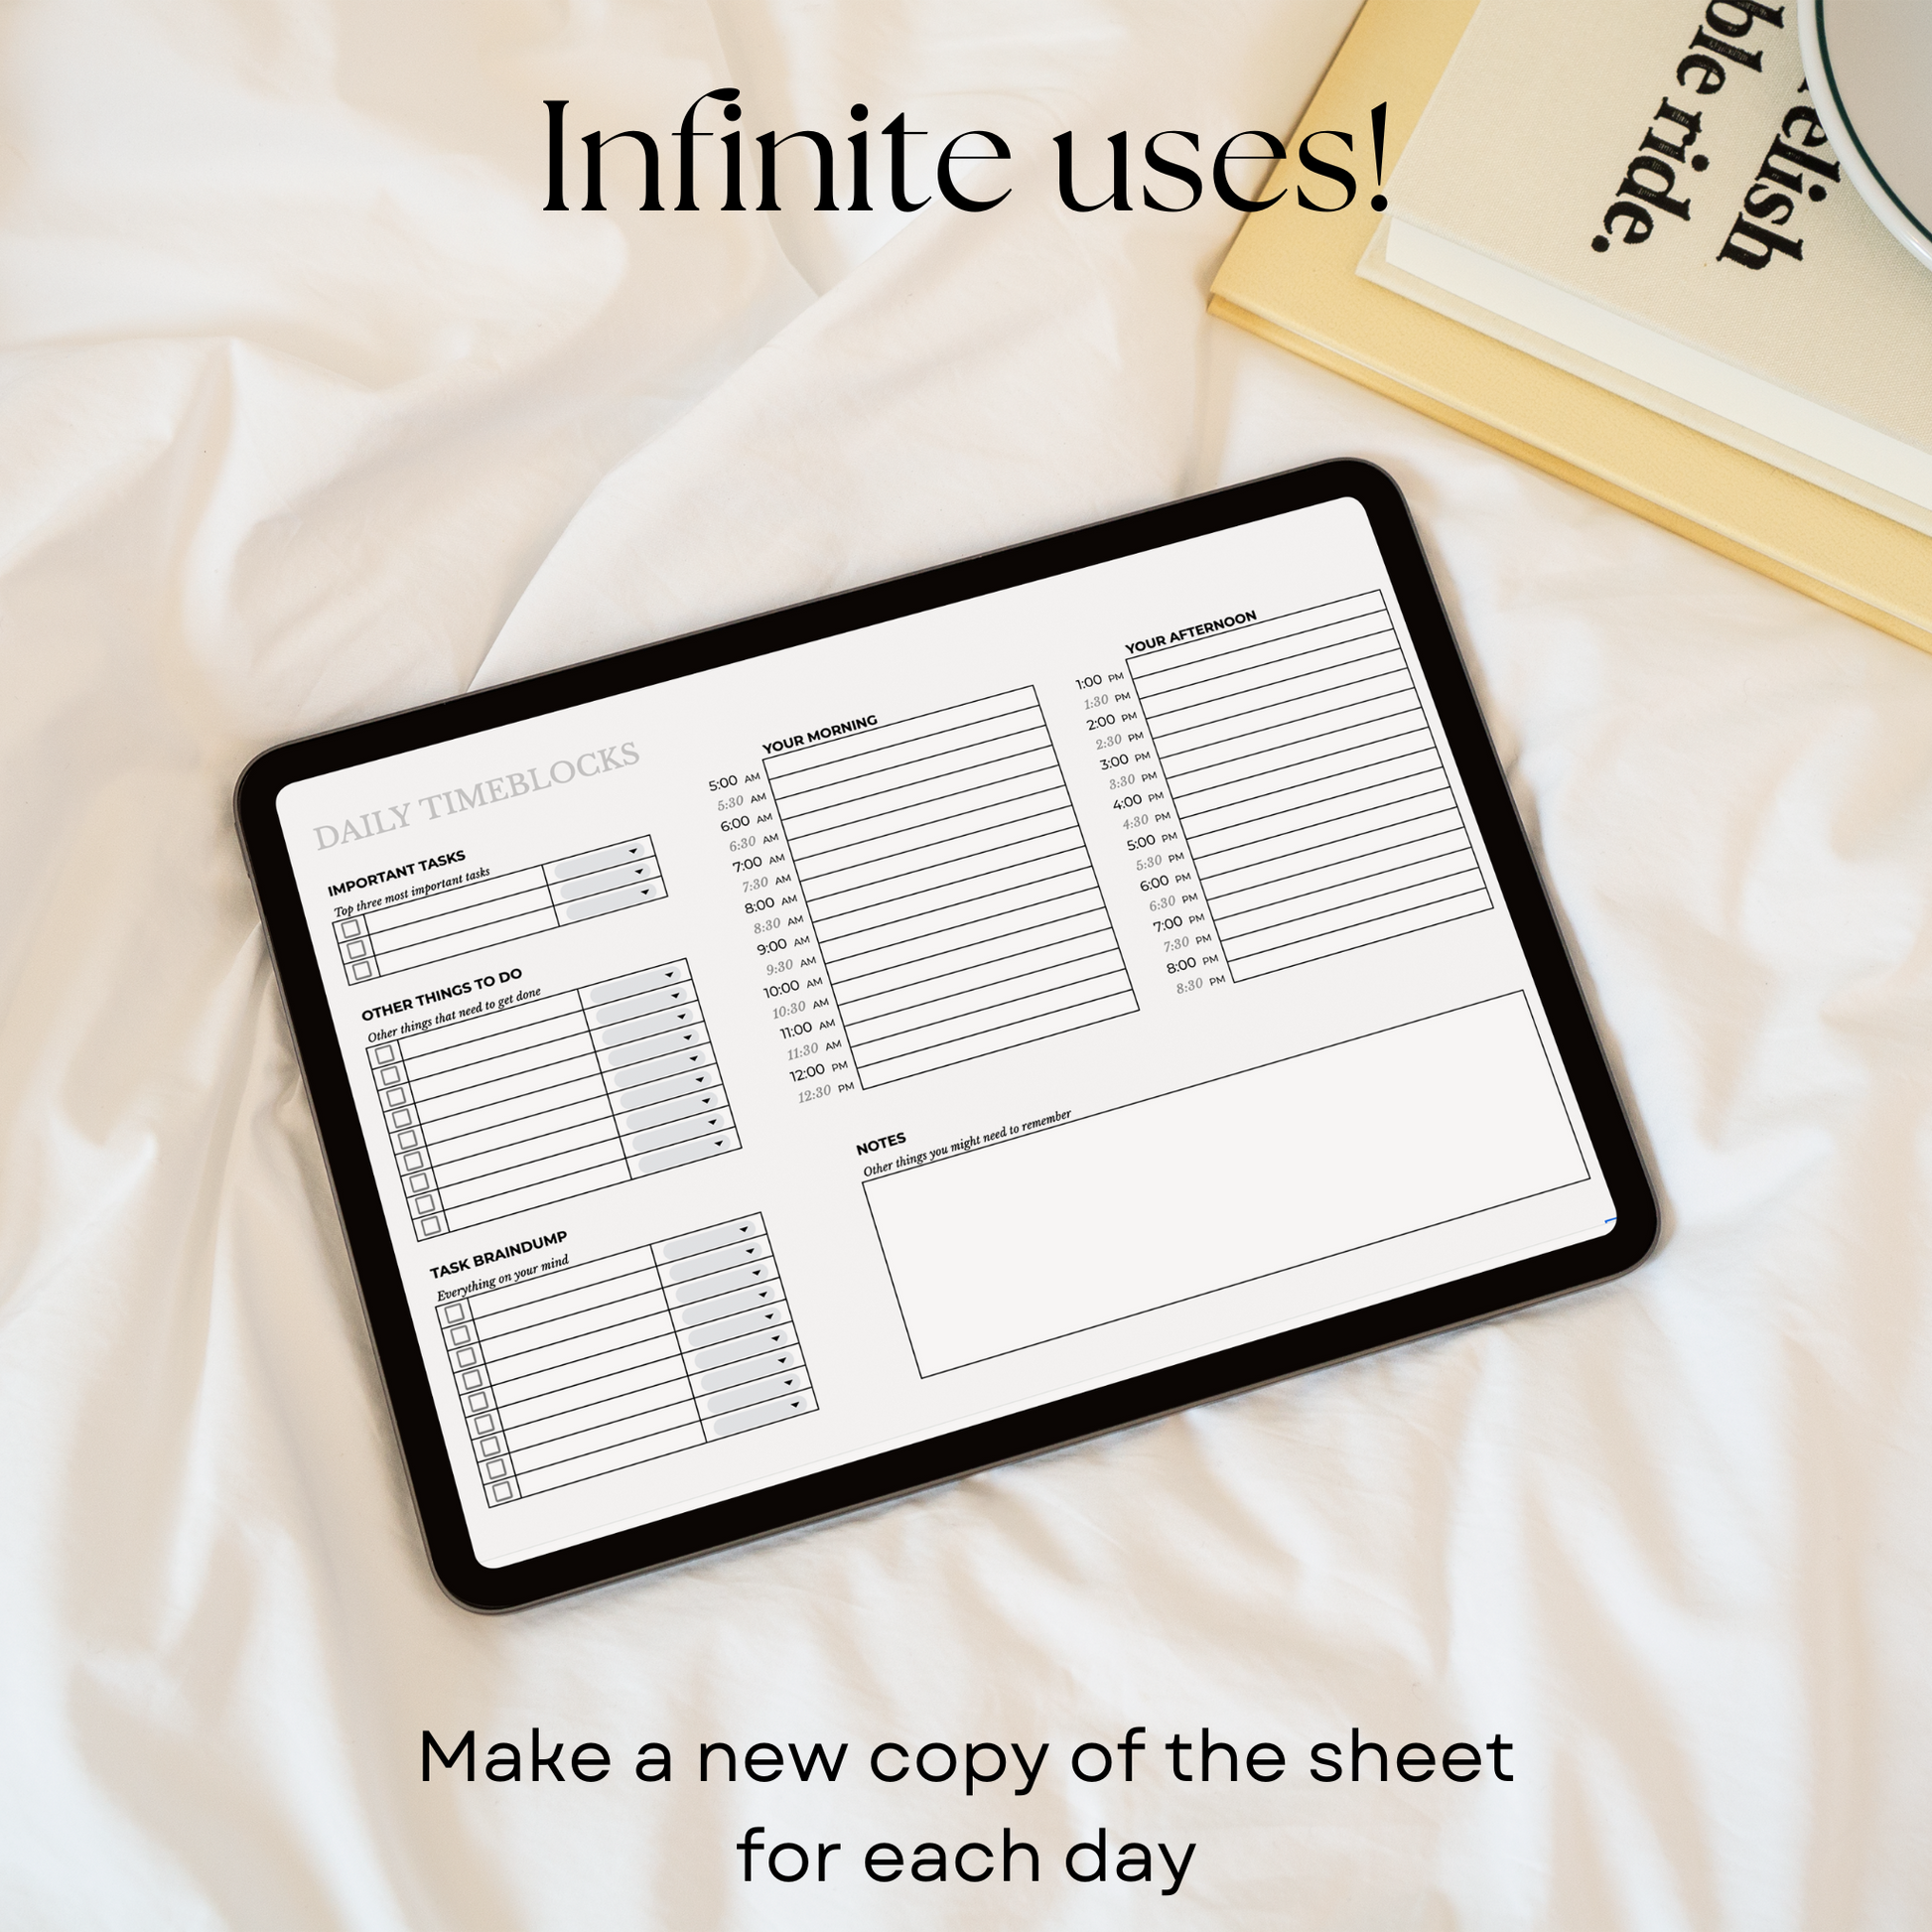 Daily timeblock sheet productivity tool for google sheets. Daily planner.